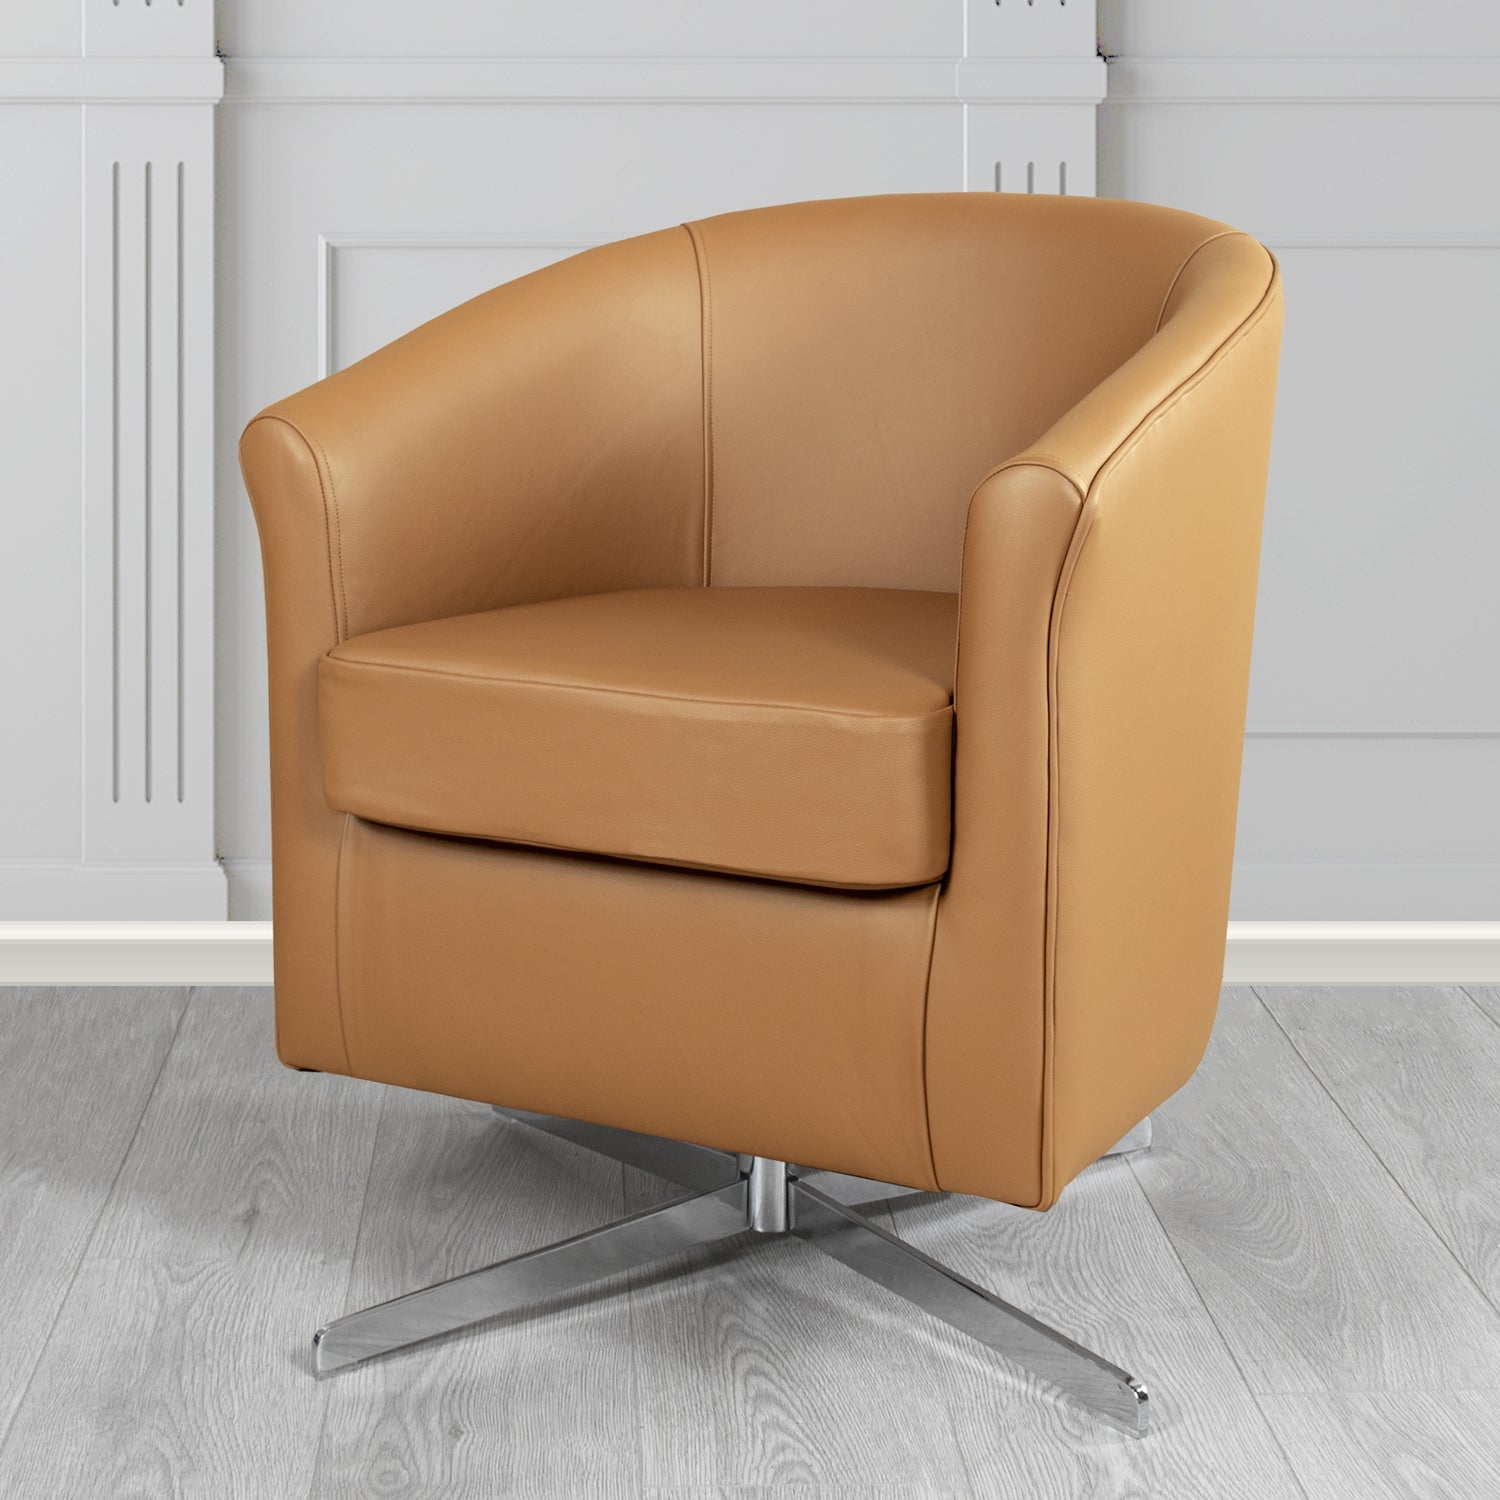 Cannes Swivel Tub Chair in Shelly Saddle Crib 5 Genuine Leather - The Tub Chair Shop